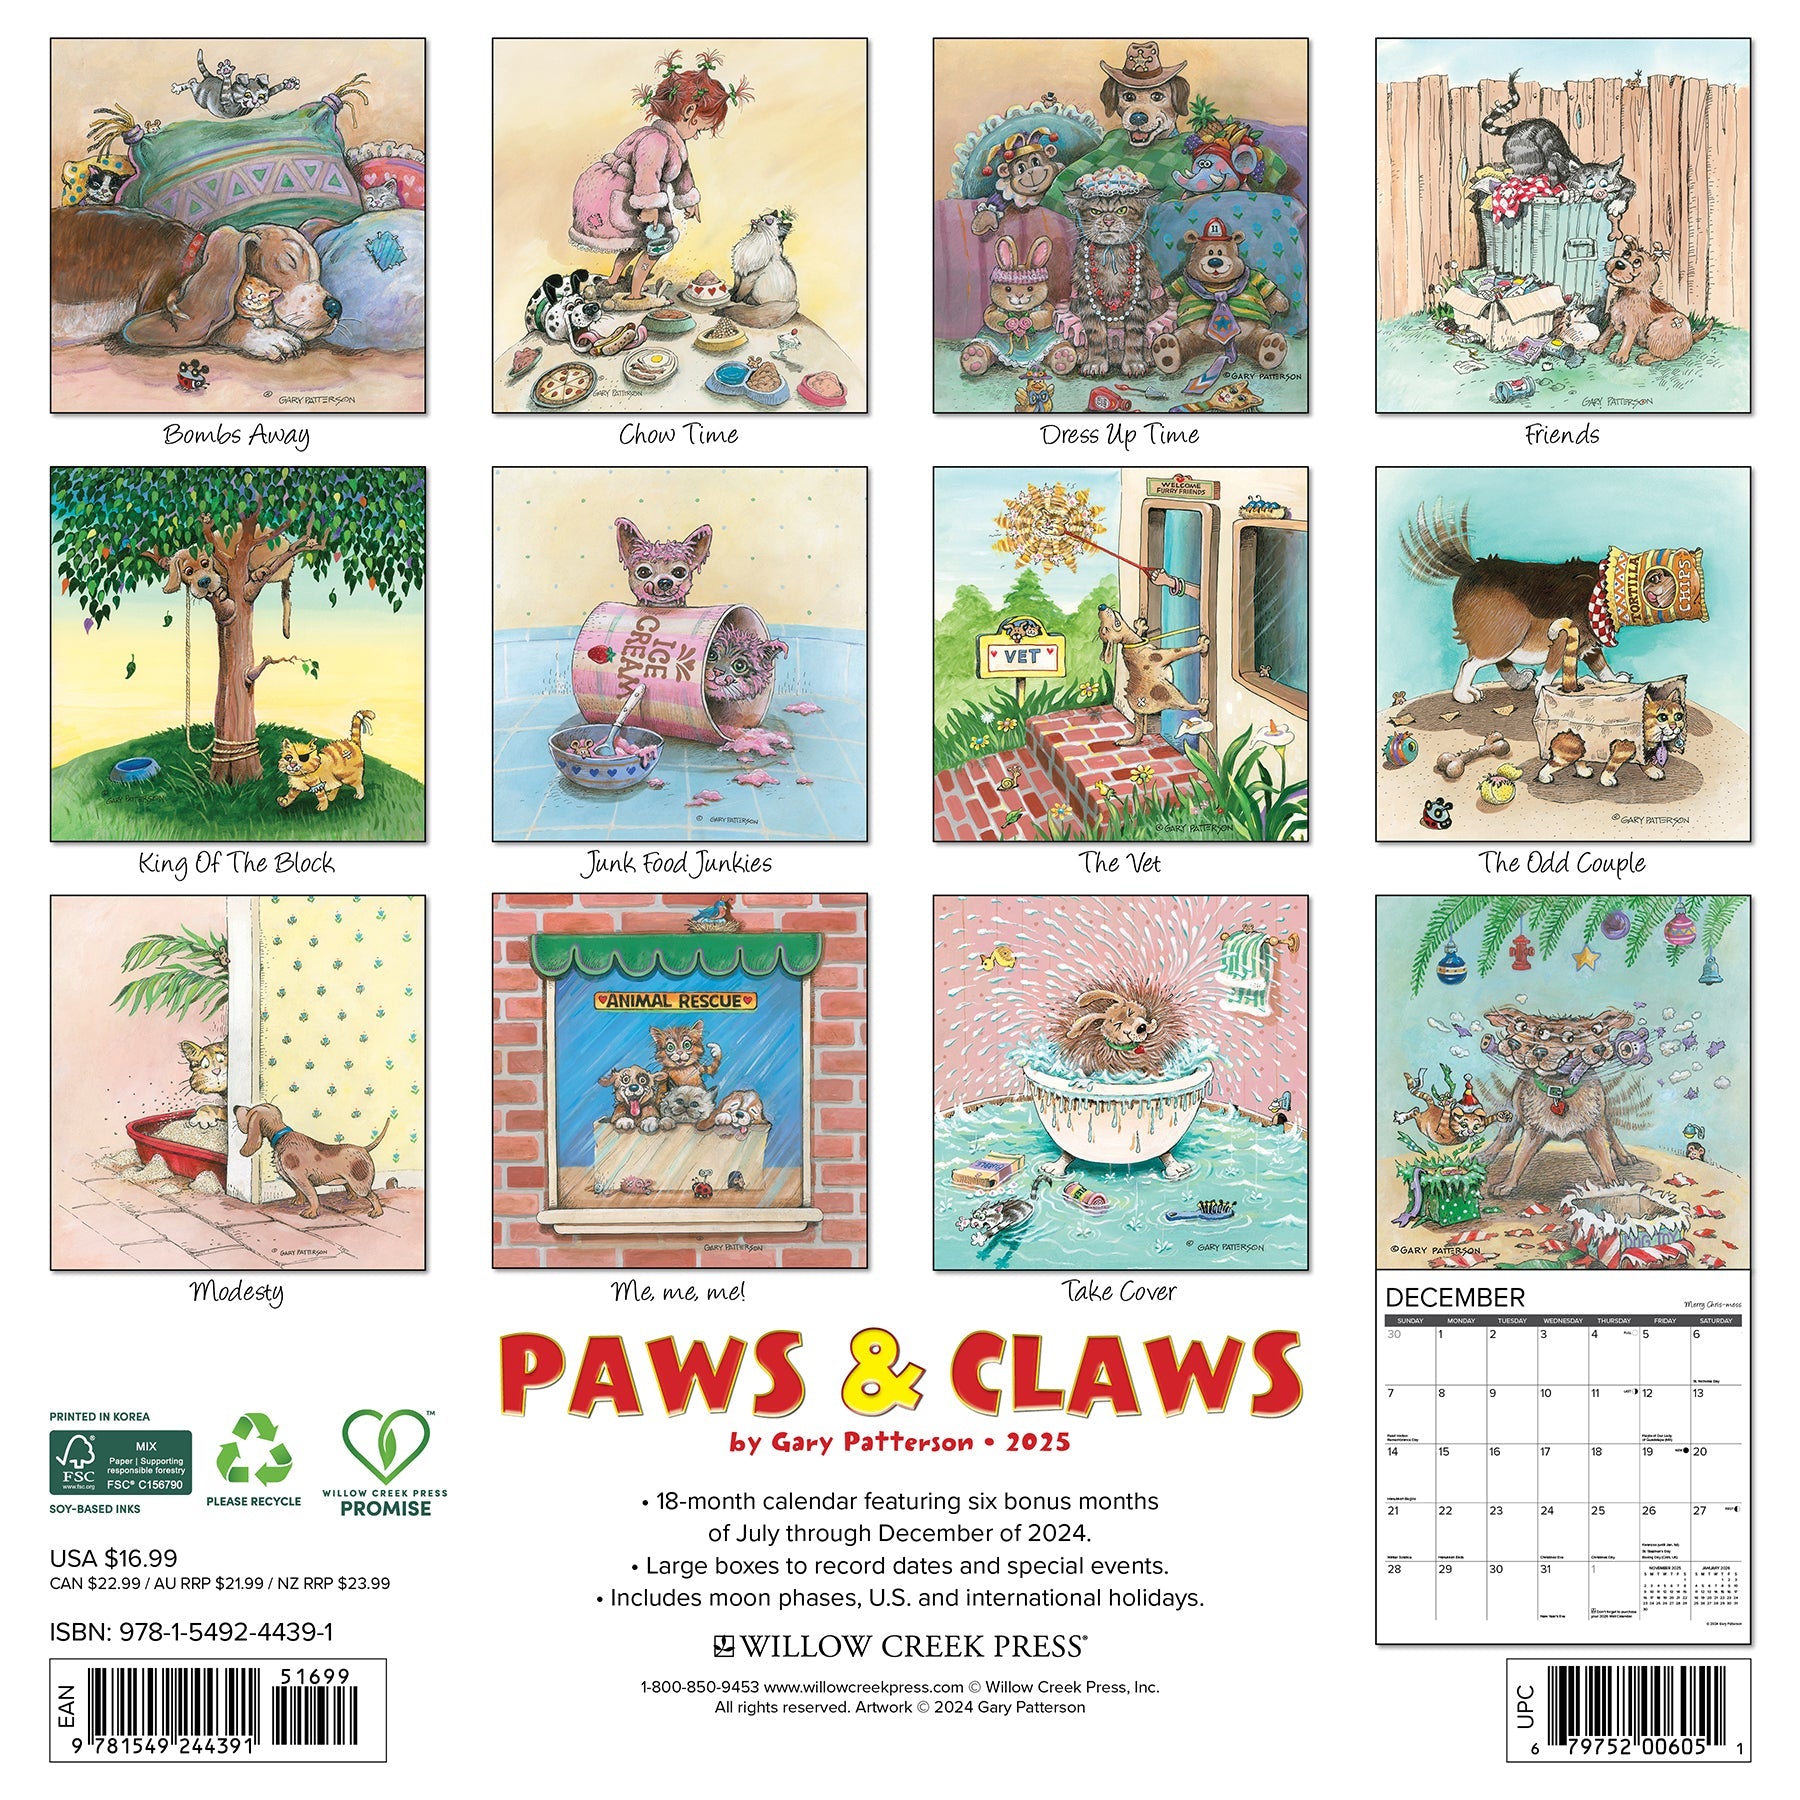 2025 Paws & Claws by Gary Patterson - Square Wall Calendar